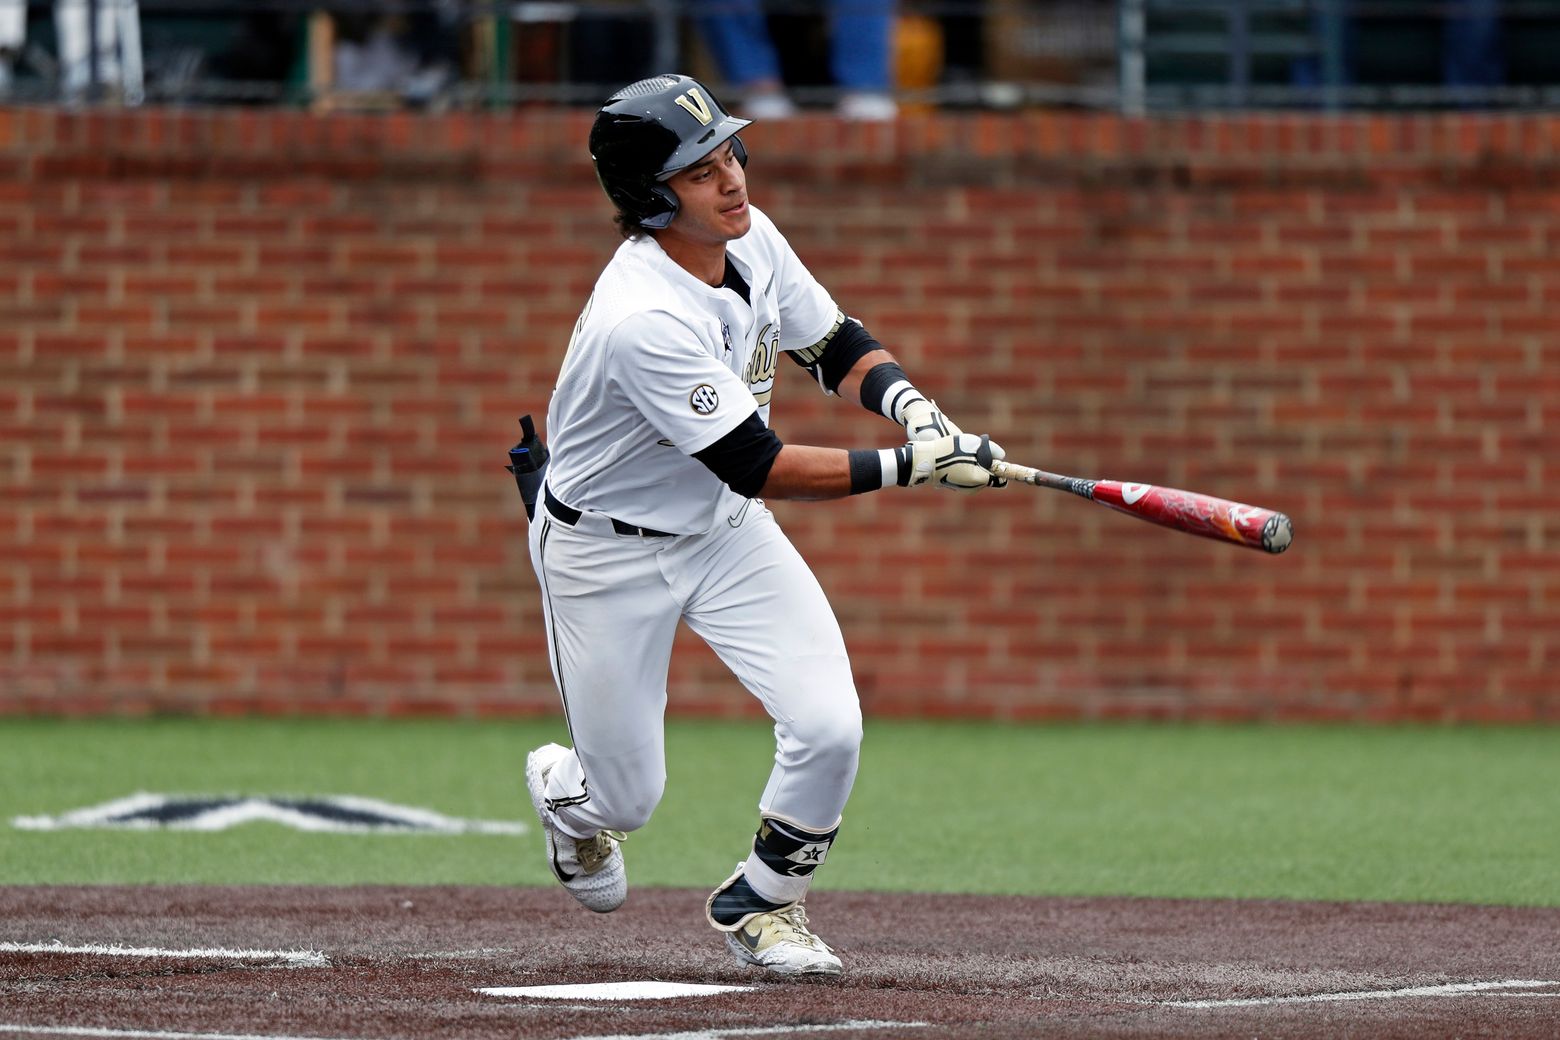 NCAA hopes on line as conference baseball tournaments open The